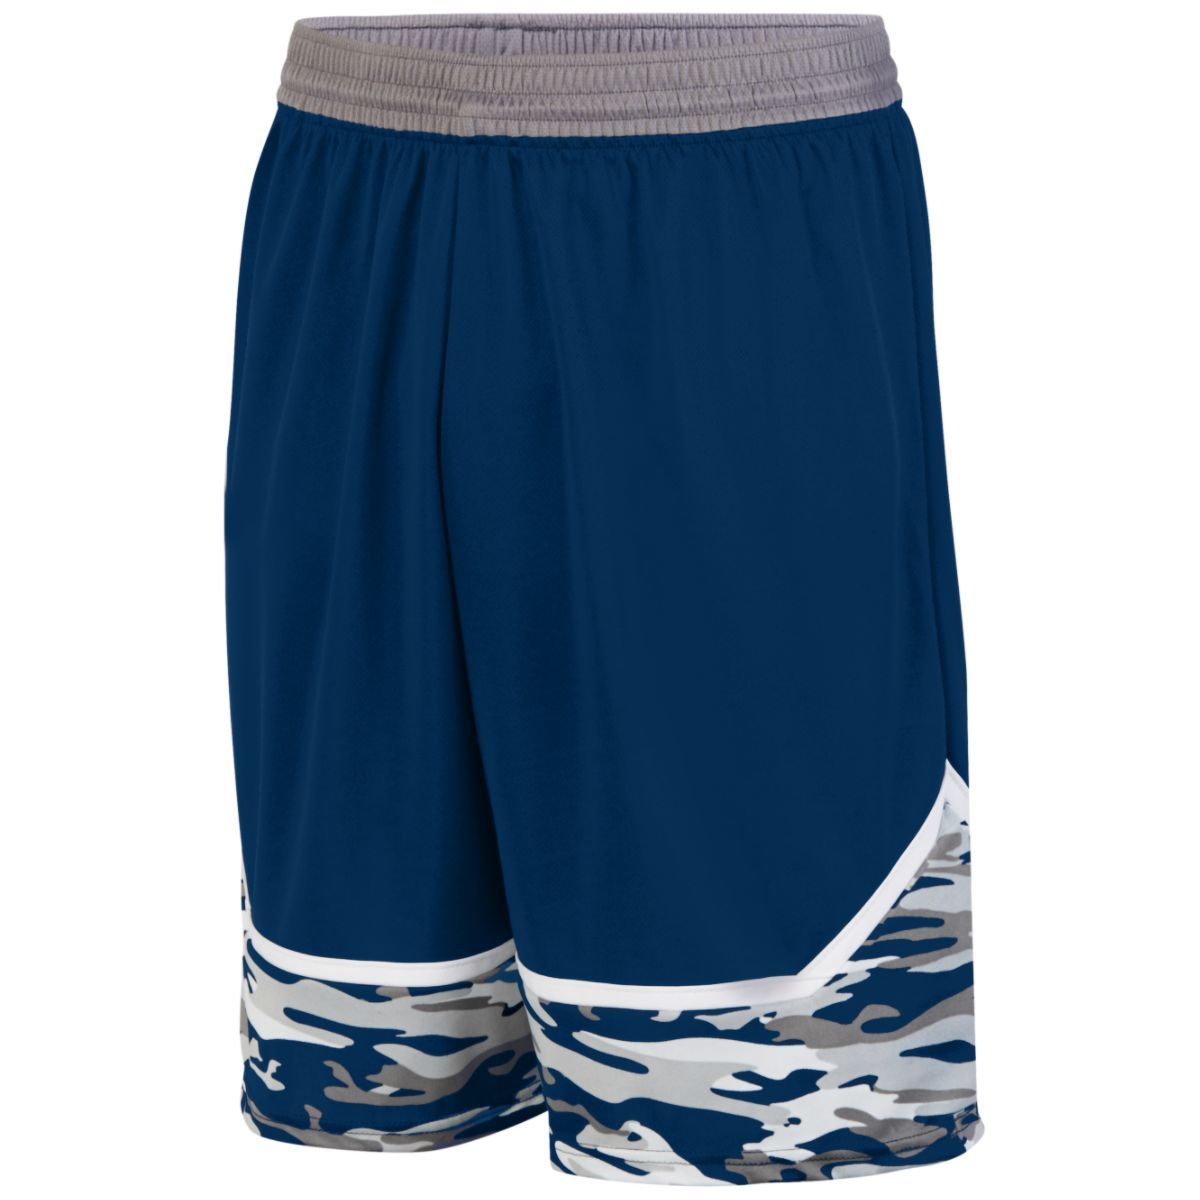 Youth Mod Camo Game Shorts 1118